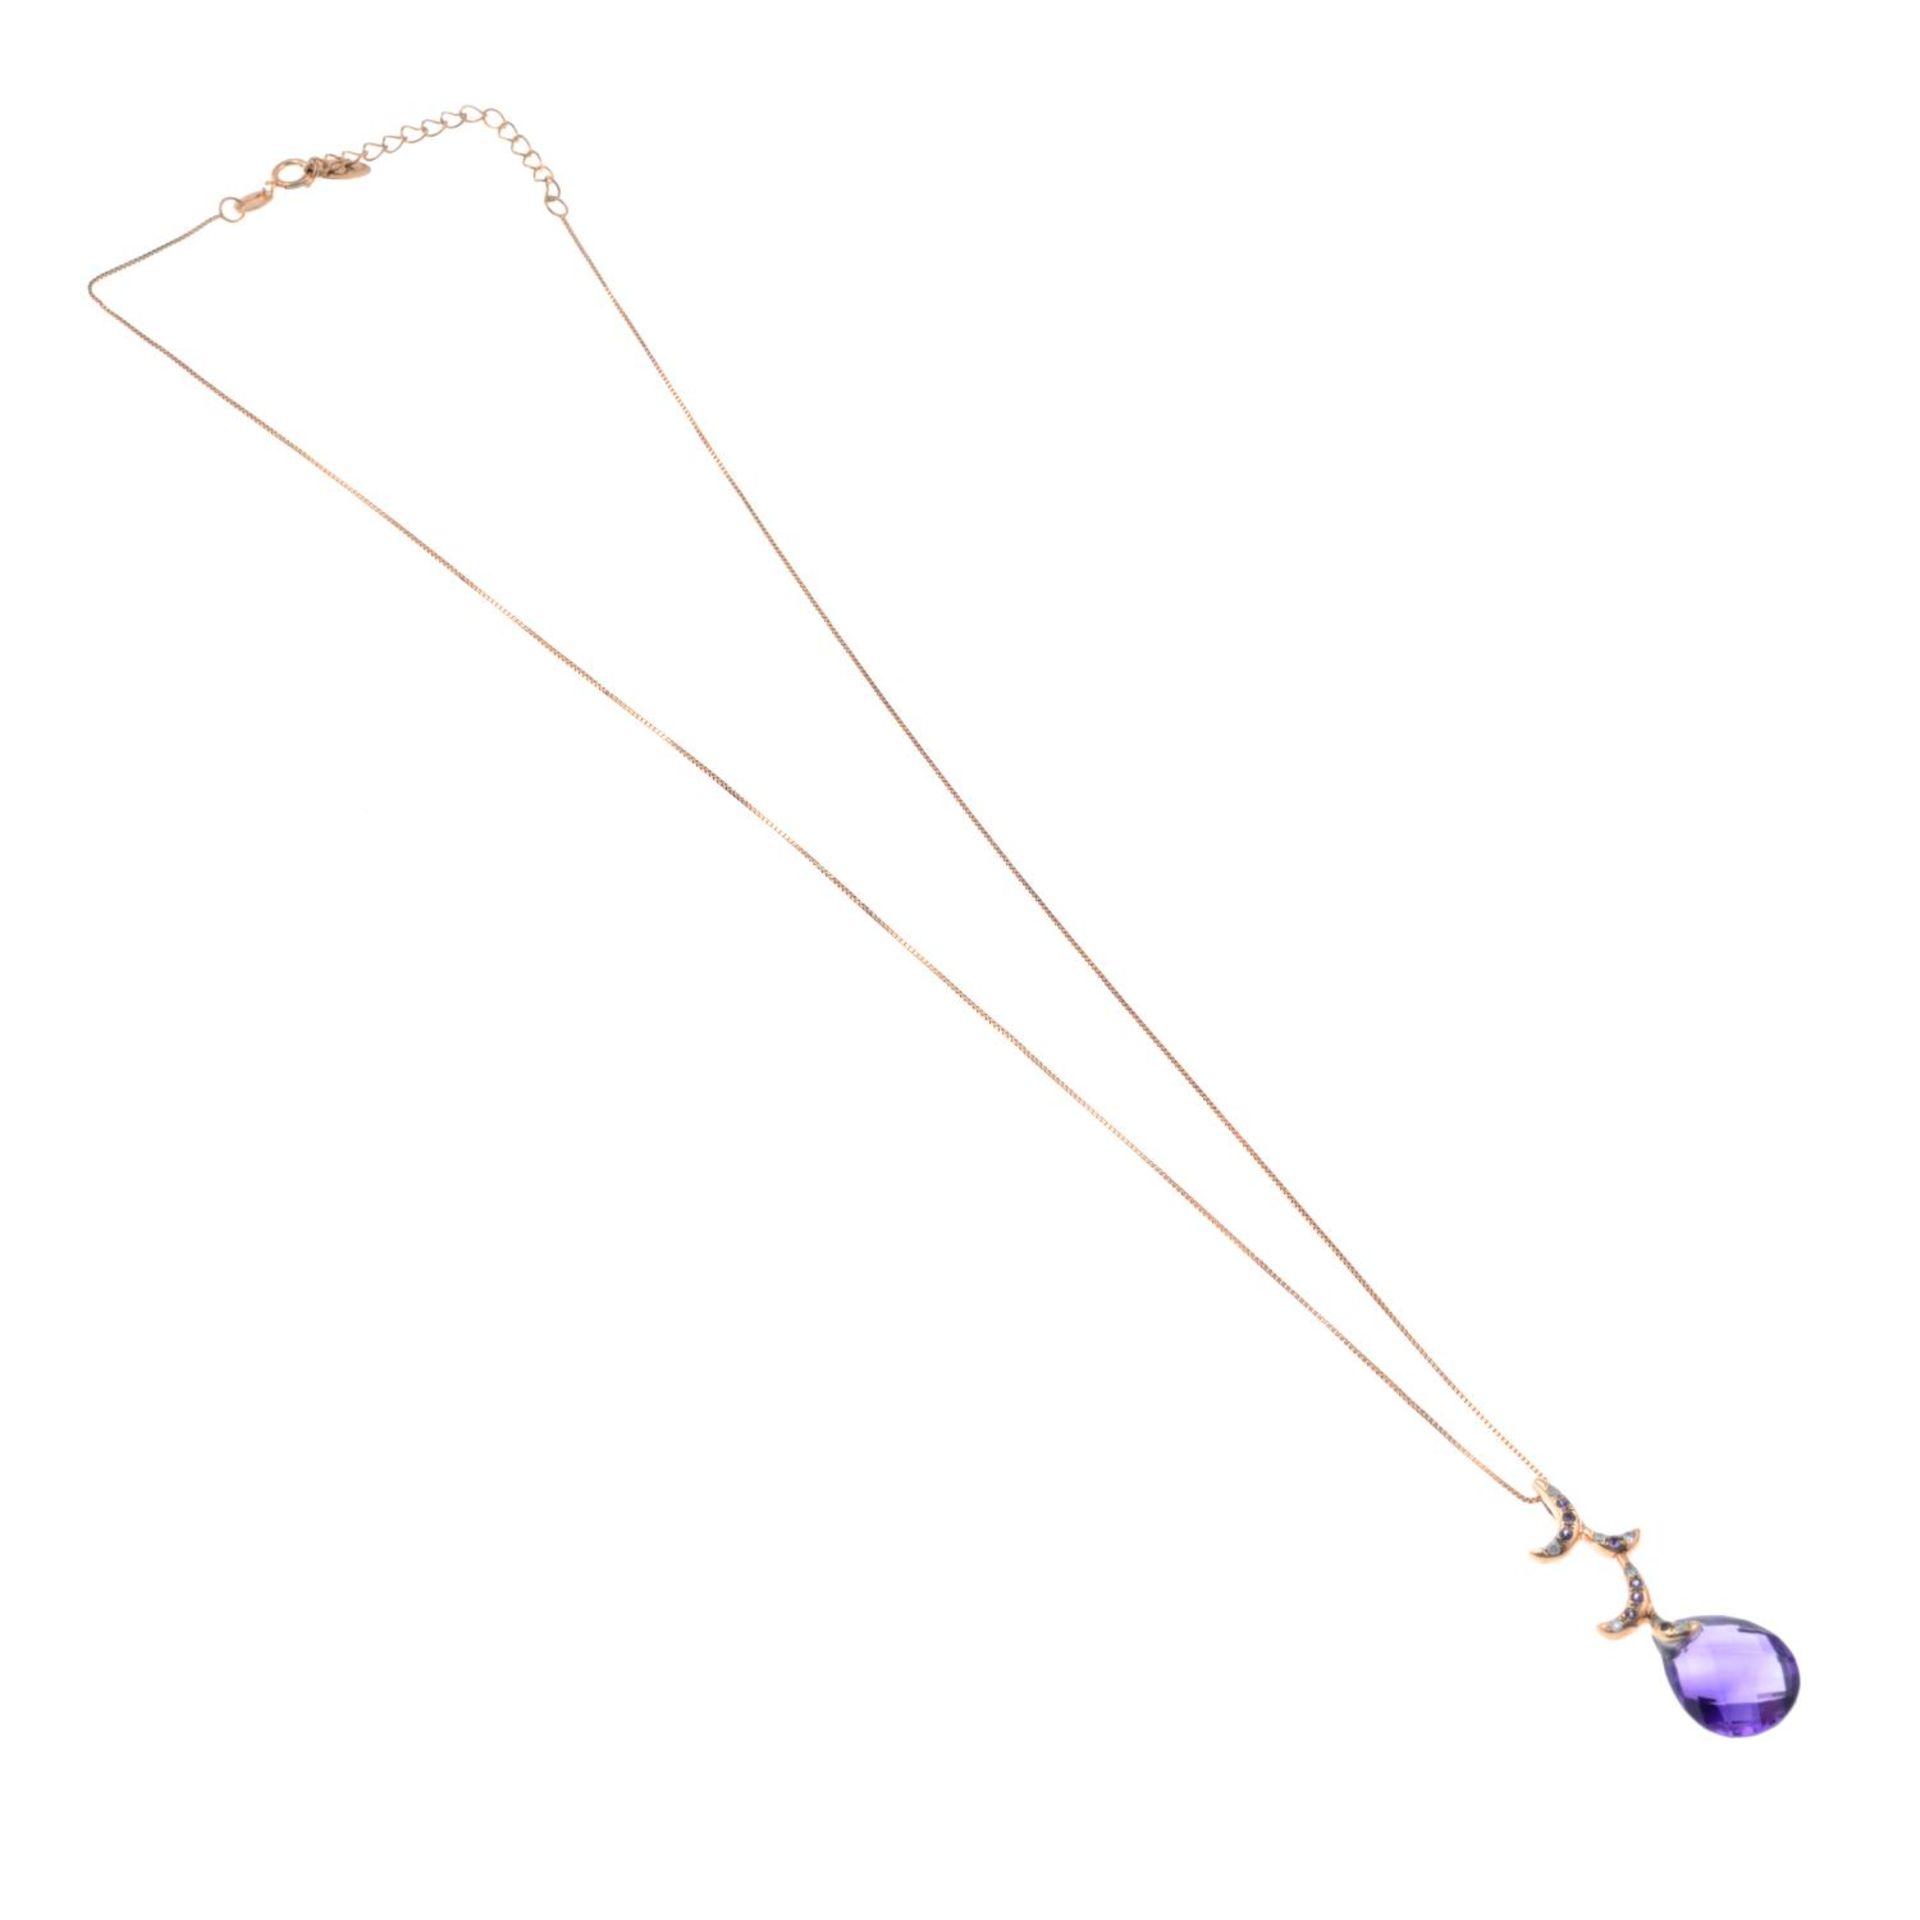 An amethyst and diamond pendant, with 18ct gold chain.Chain with hallmarks for 18ct gold. - Image 3 of 3